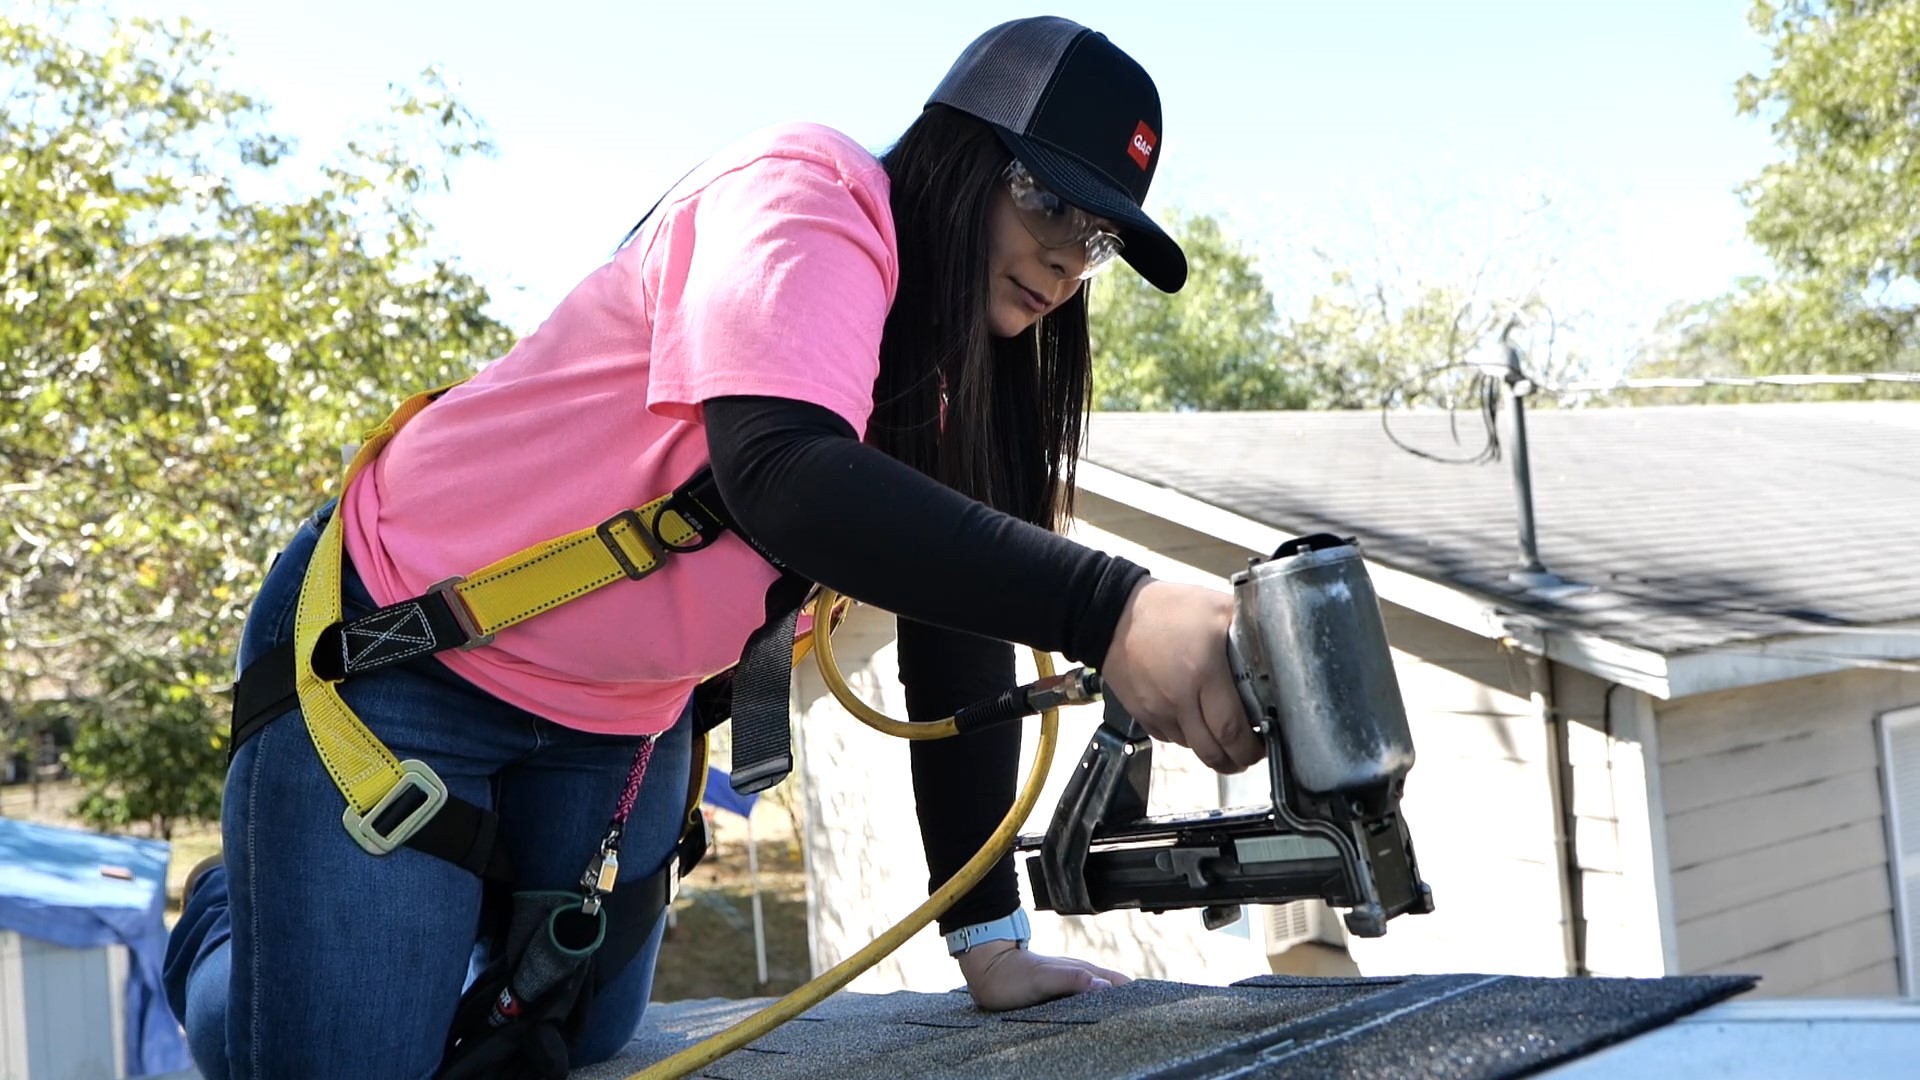 Roofing has a lot of perks. Fritz said she found it appealing that no degree or apprenticeship was required to get started.